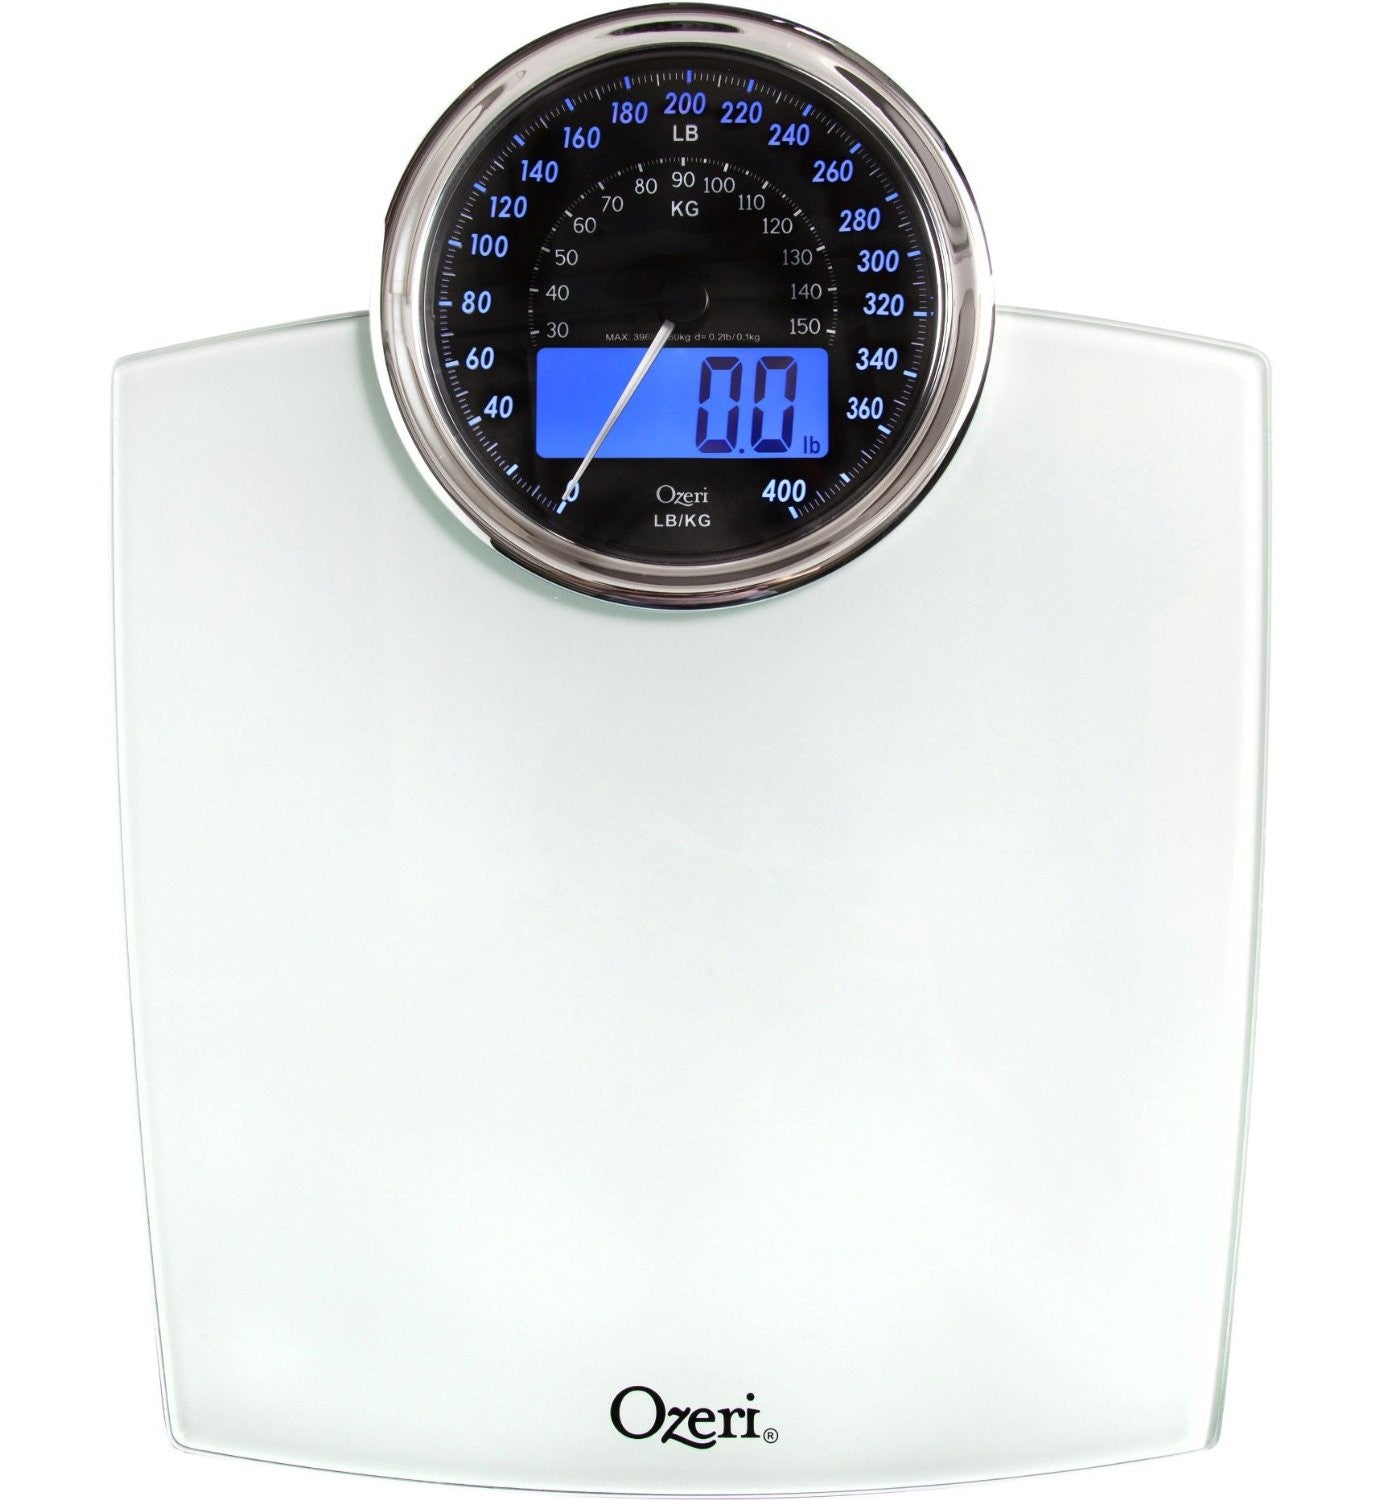 Ozeri Precision Digital Bath Scale 400 lbs Edition in Tempered Glass with Step-On Activation Black